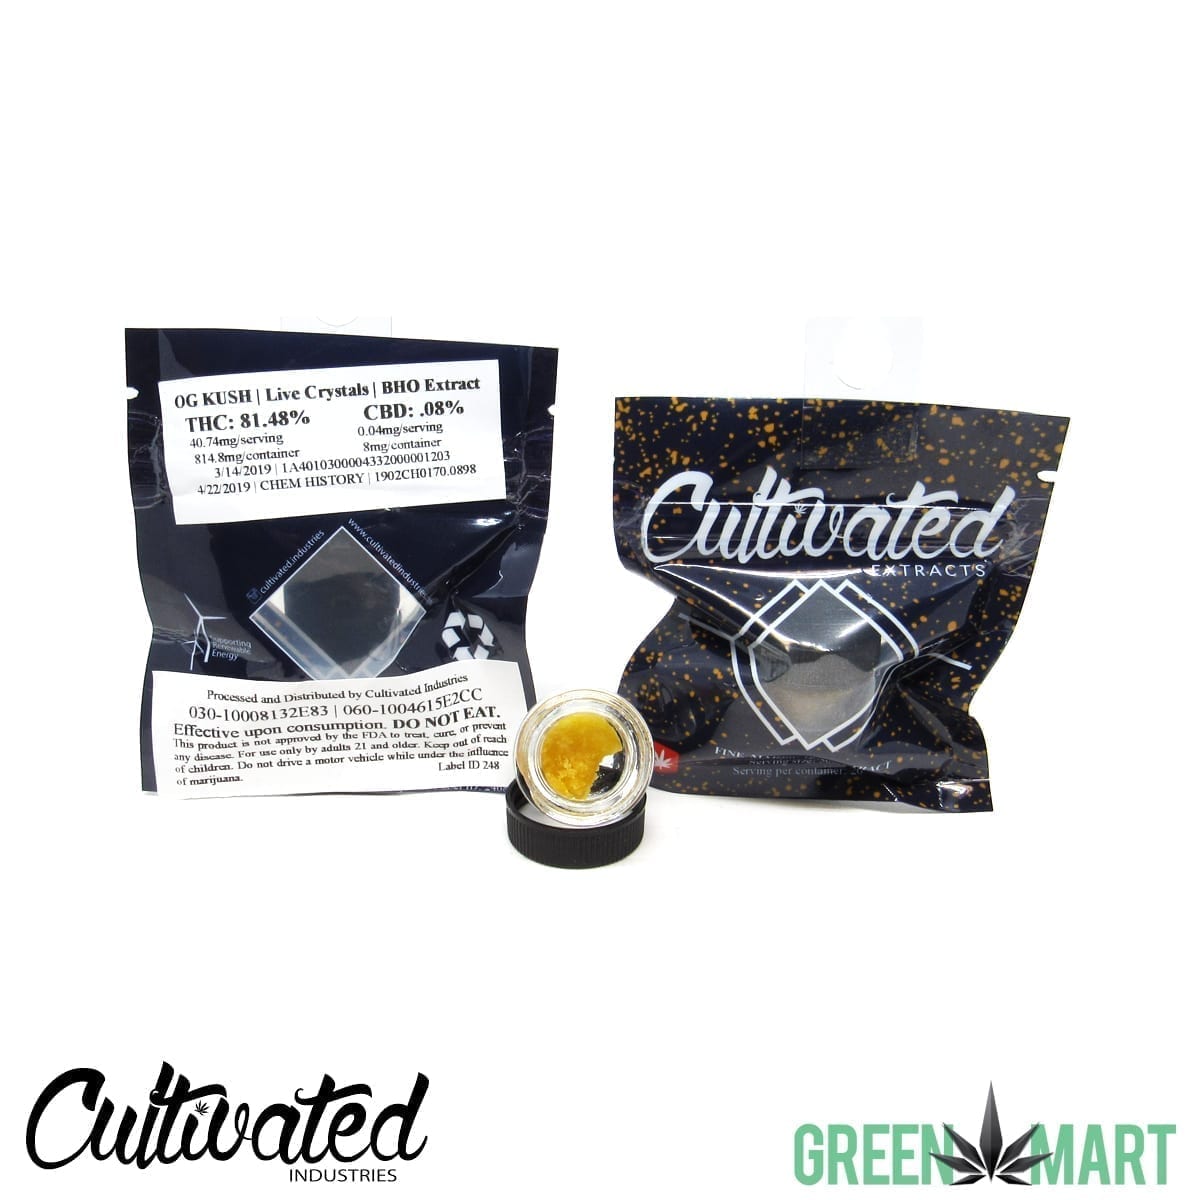 Cultivated Industries - OG Kush Live Crystals